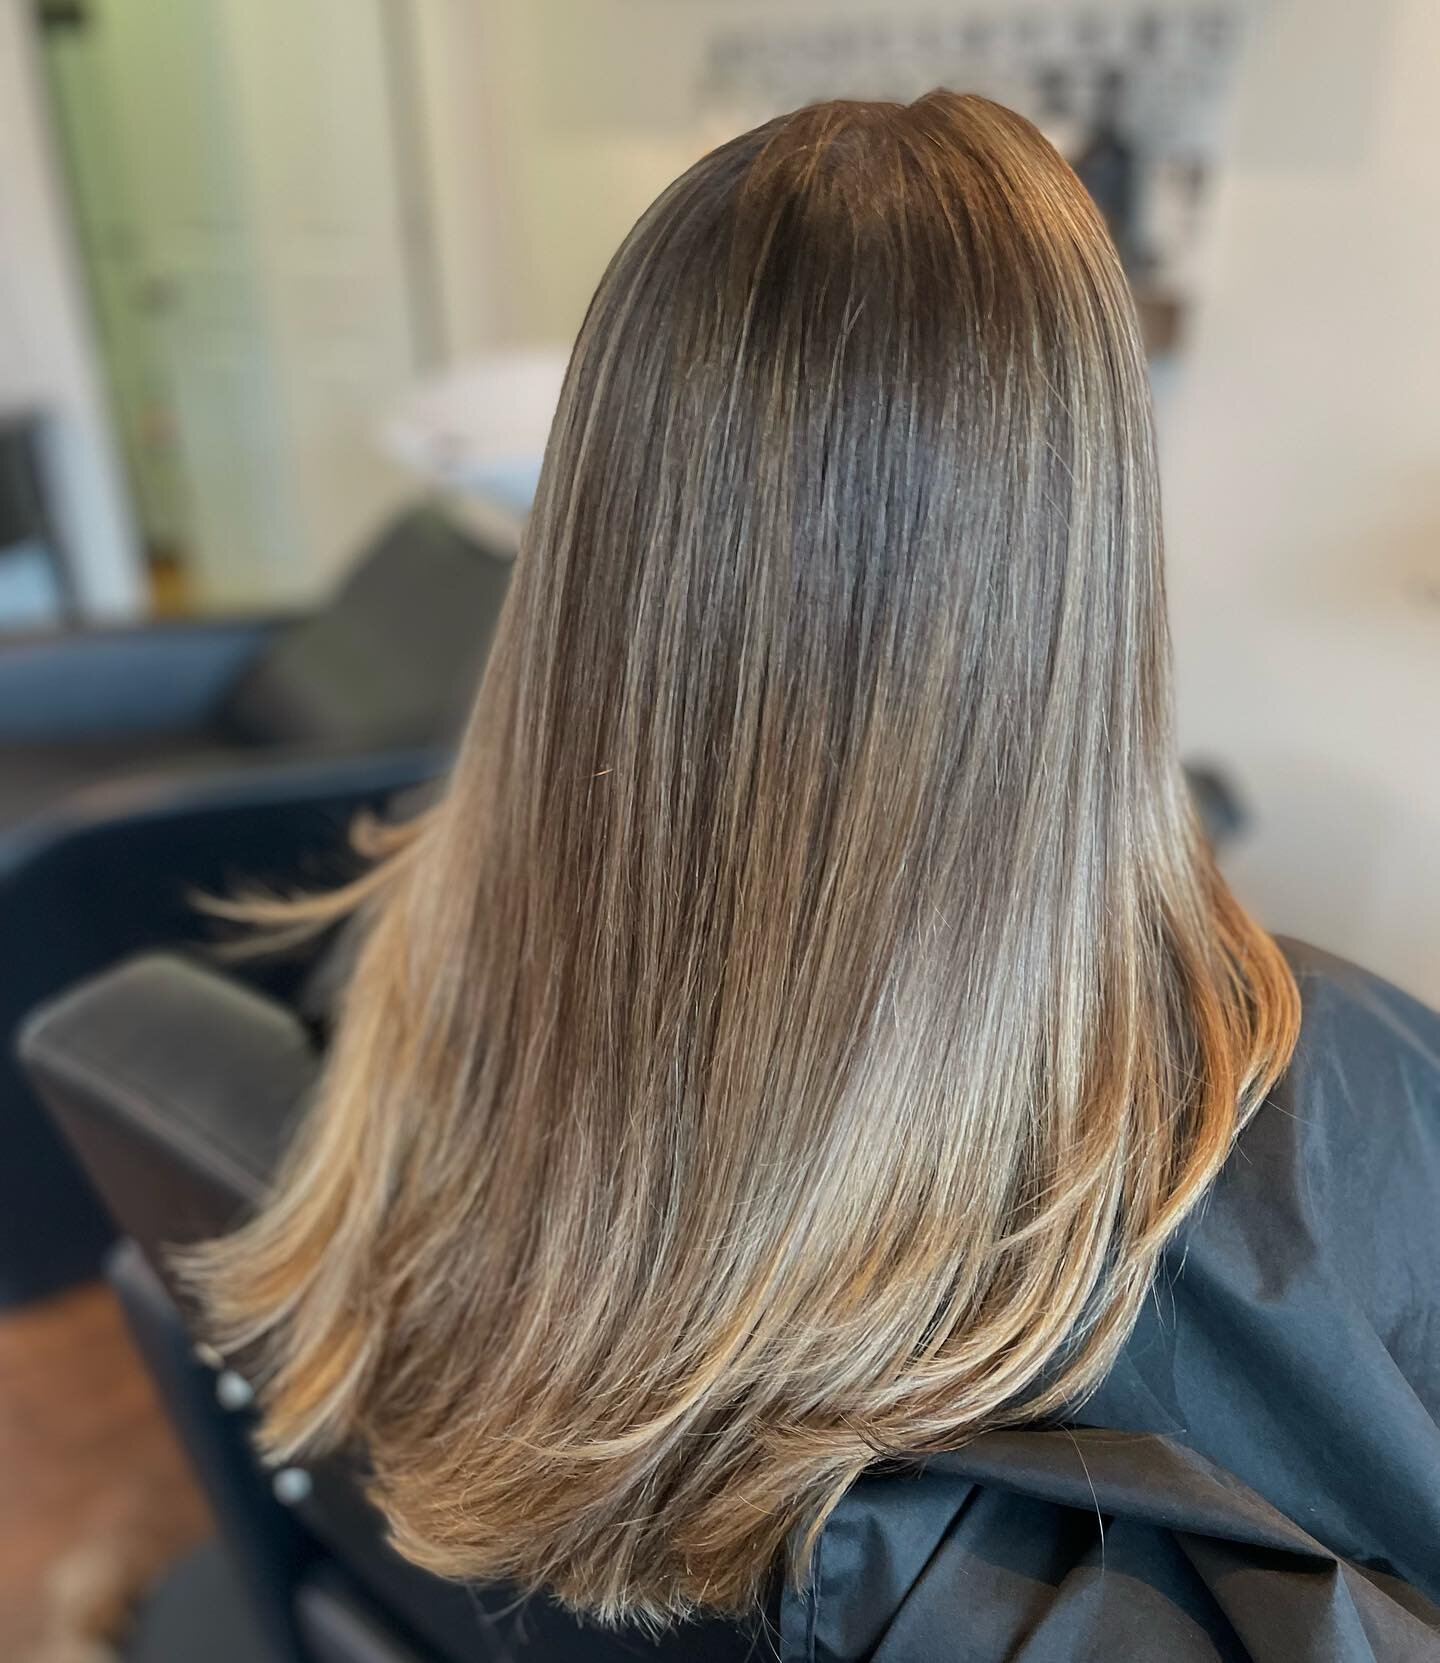 From grown out Covid hair to soft, bright and blended! 

@moroccanoilpro gets the job DONE ☑️ 

#ctdimensionalblonde #ctlivedincolor #colorspecialist #Blonde #livedin #moroccanoil #verb #springhair